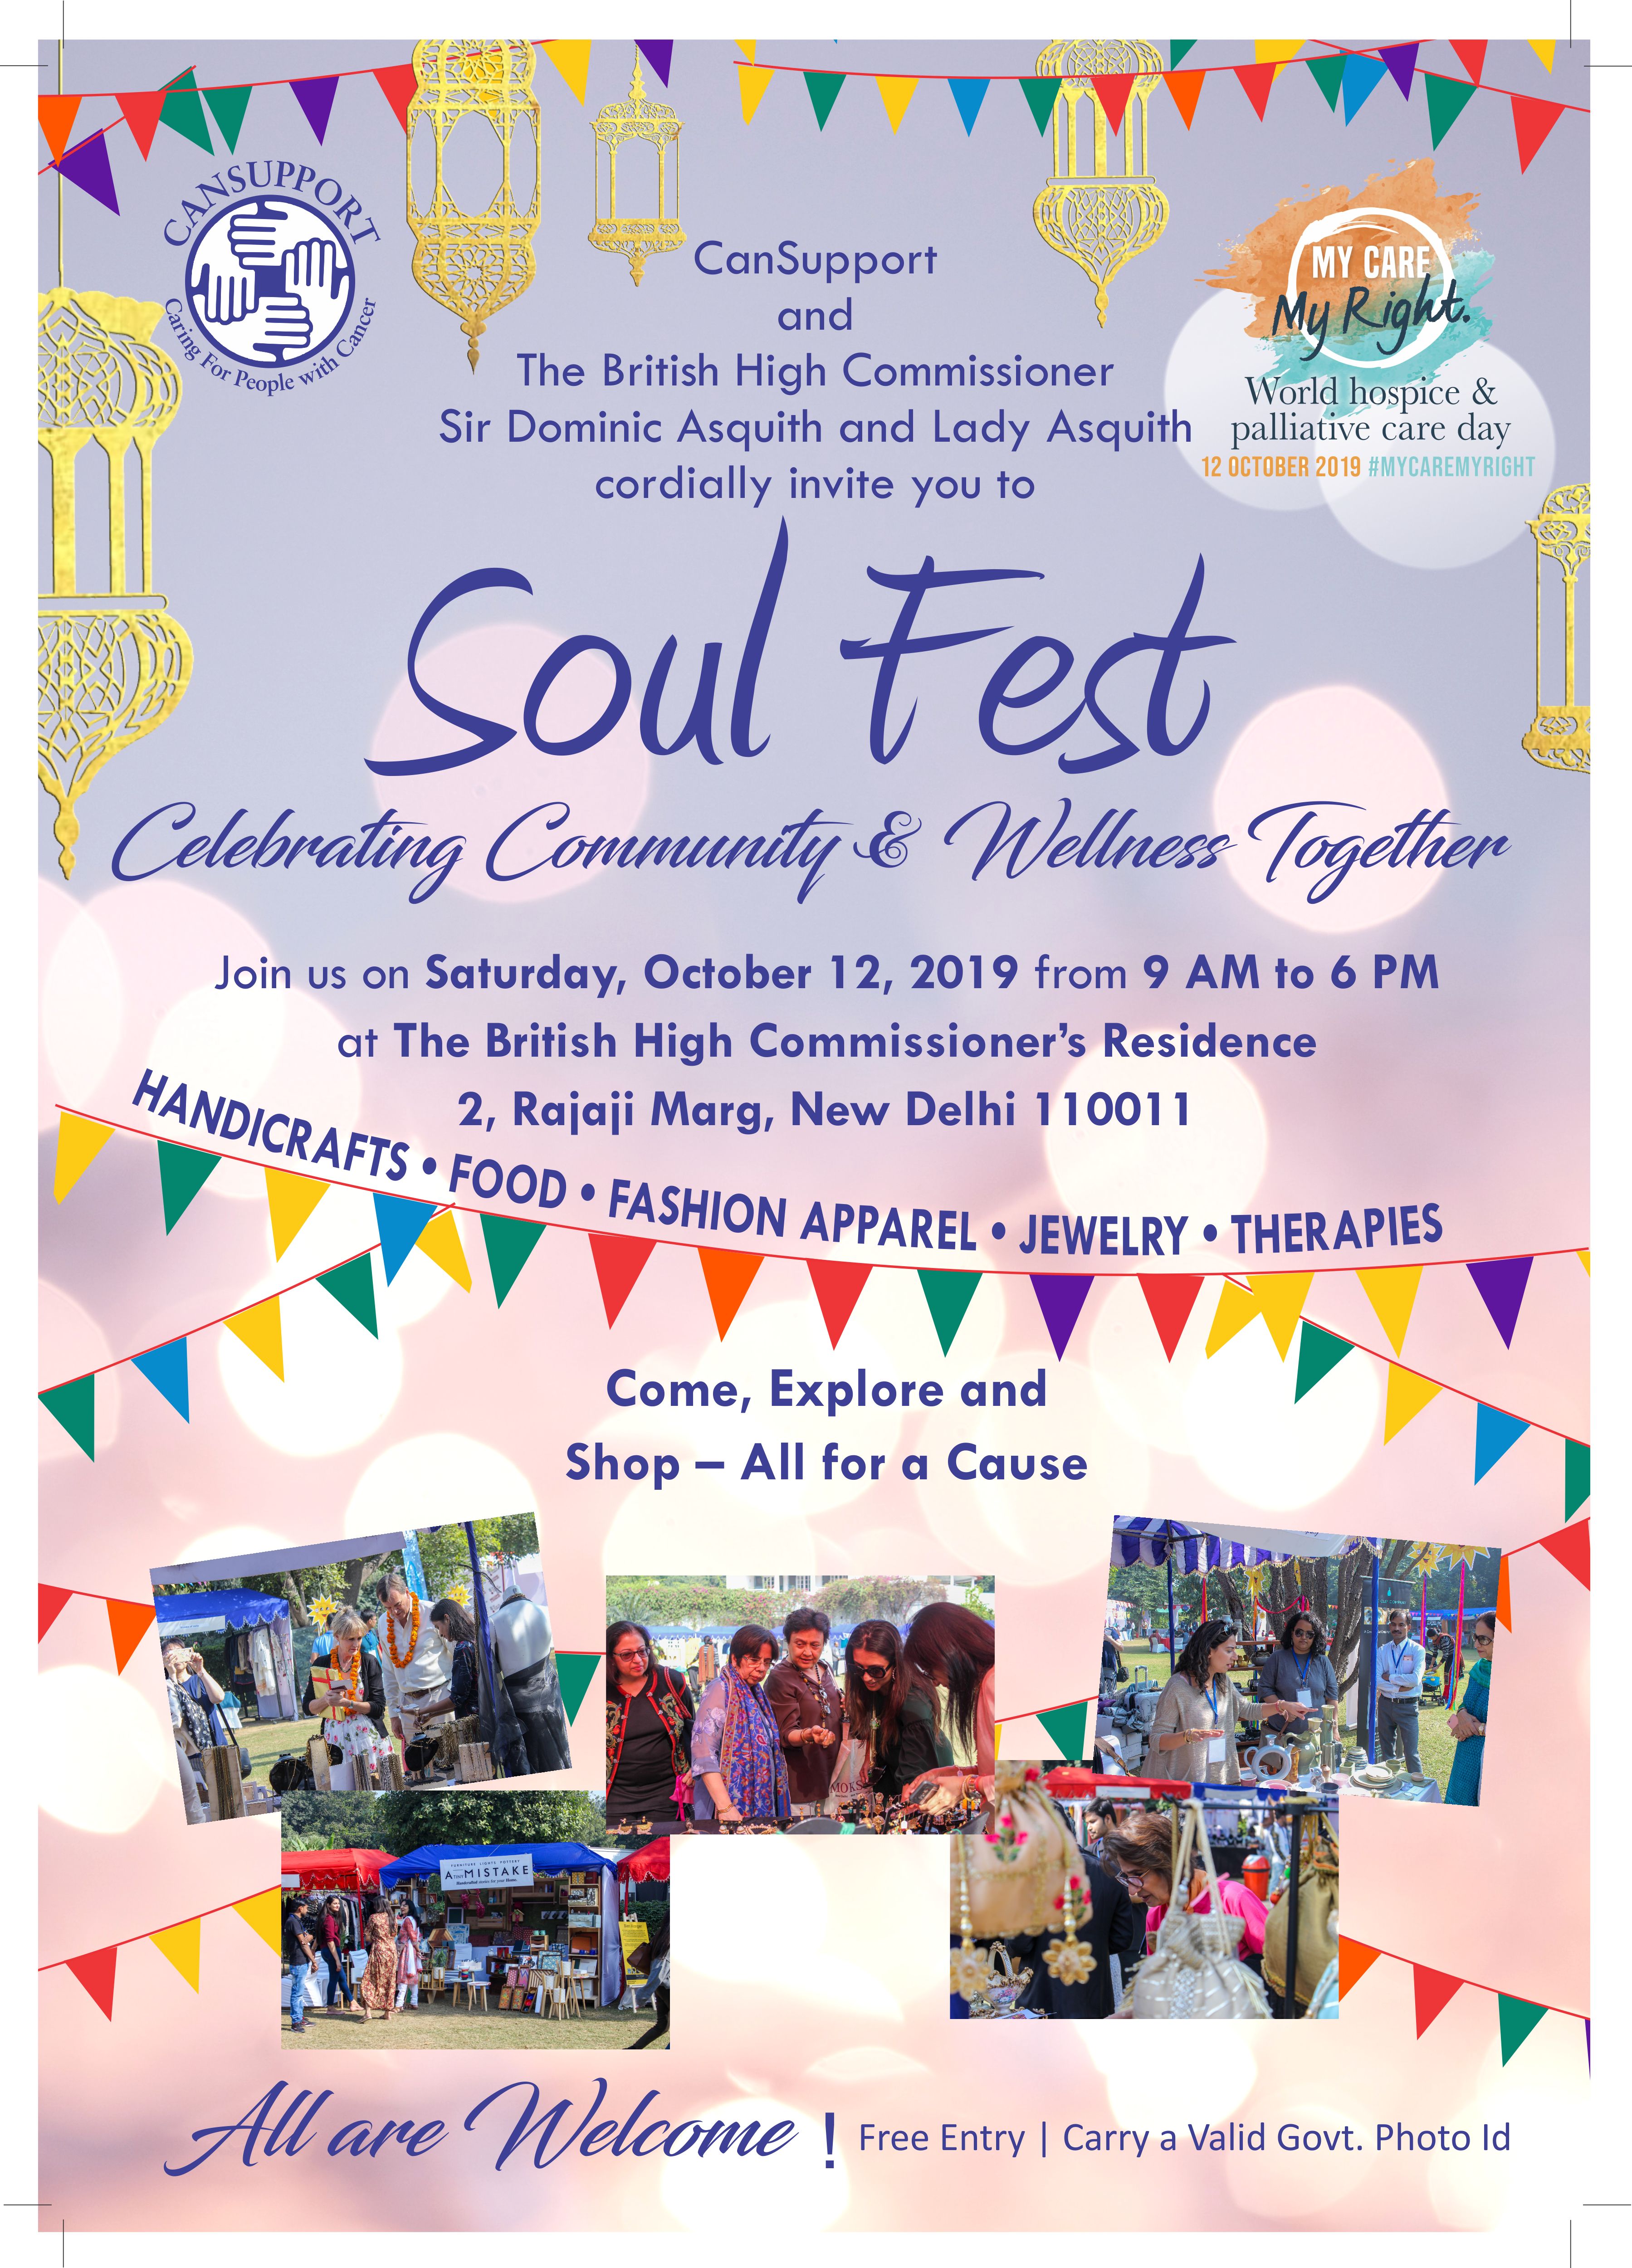 soulfest-celebrating-community-and-wellness-together | CanSupport